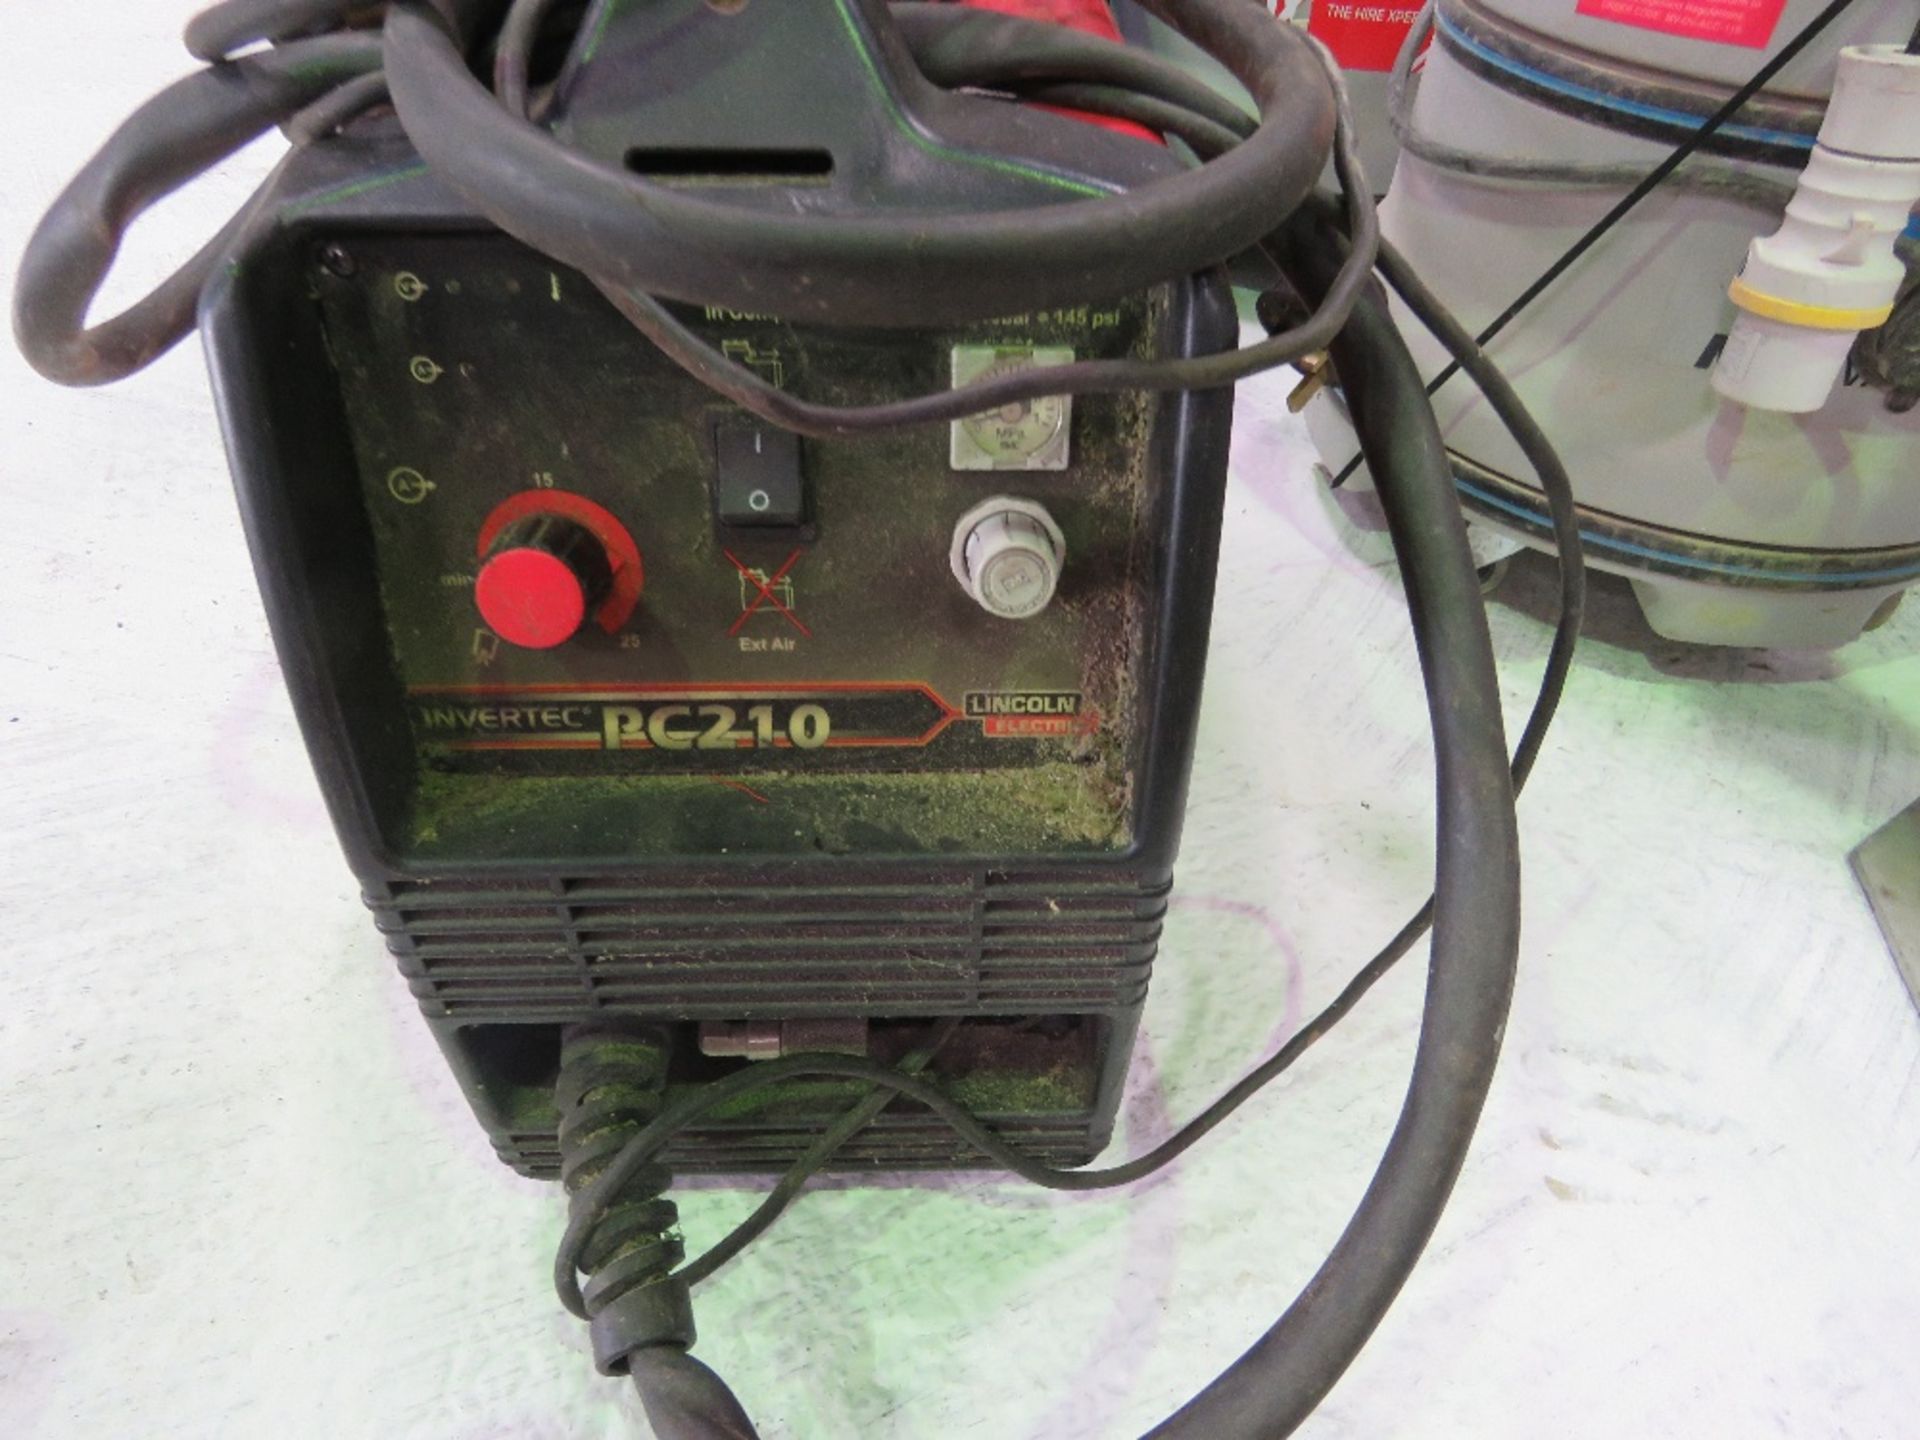 LINCOLN INVERTEC PC210 240VOLT POWERED PLASMA CUTTER. - Image 3 of 5